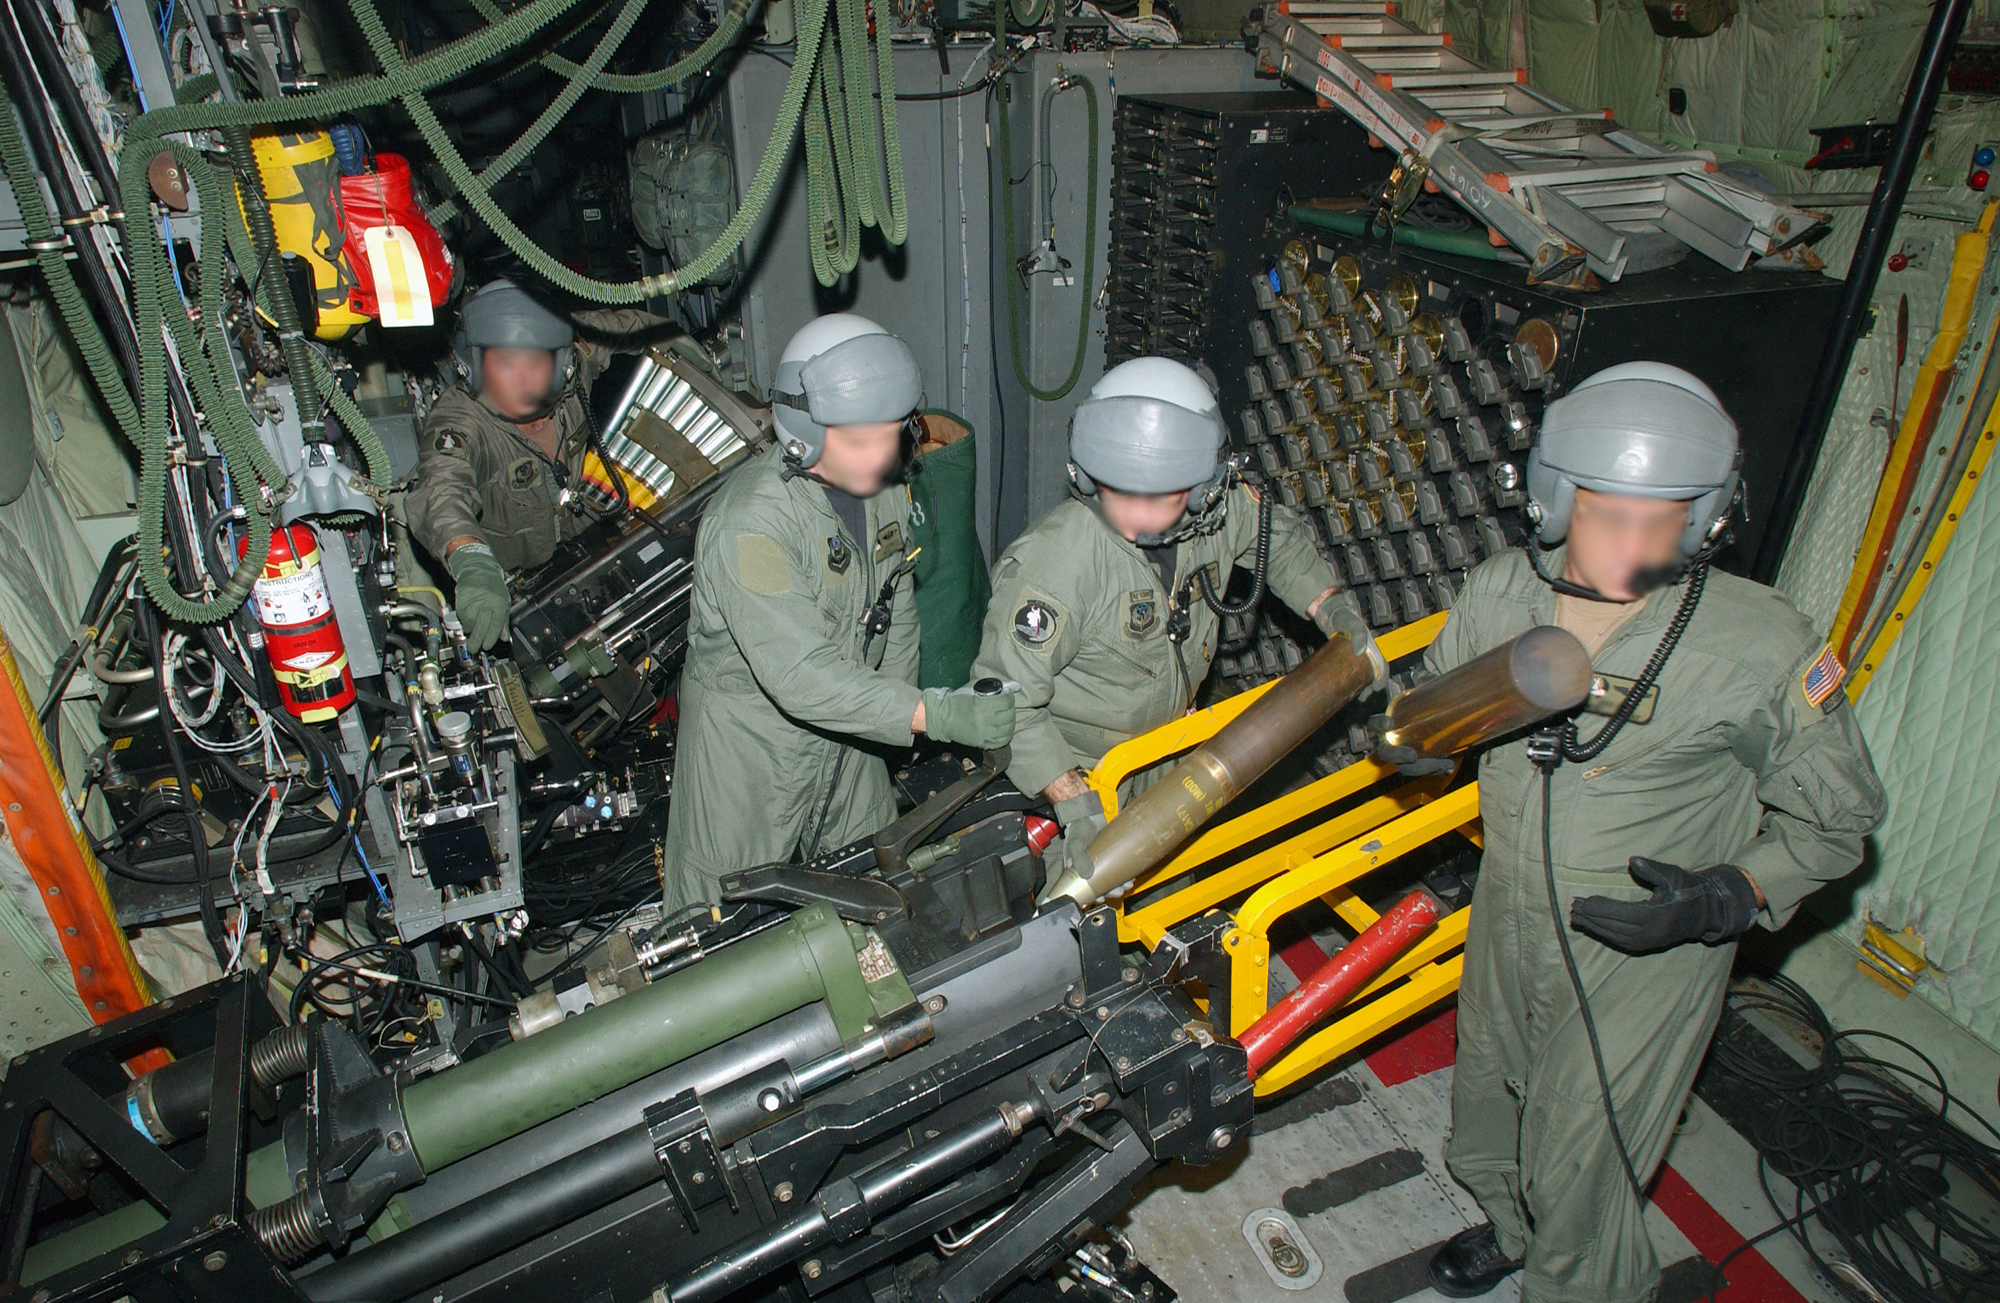          Lockheeds AC-130H Spectre Gunship
Gunners loading 40 mm cannon (background) and 105 mm howitzer (foreground)